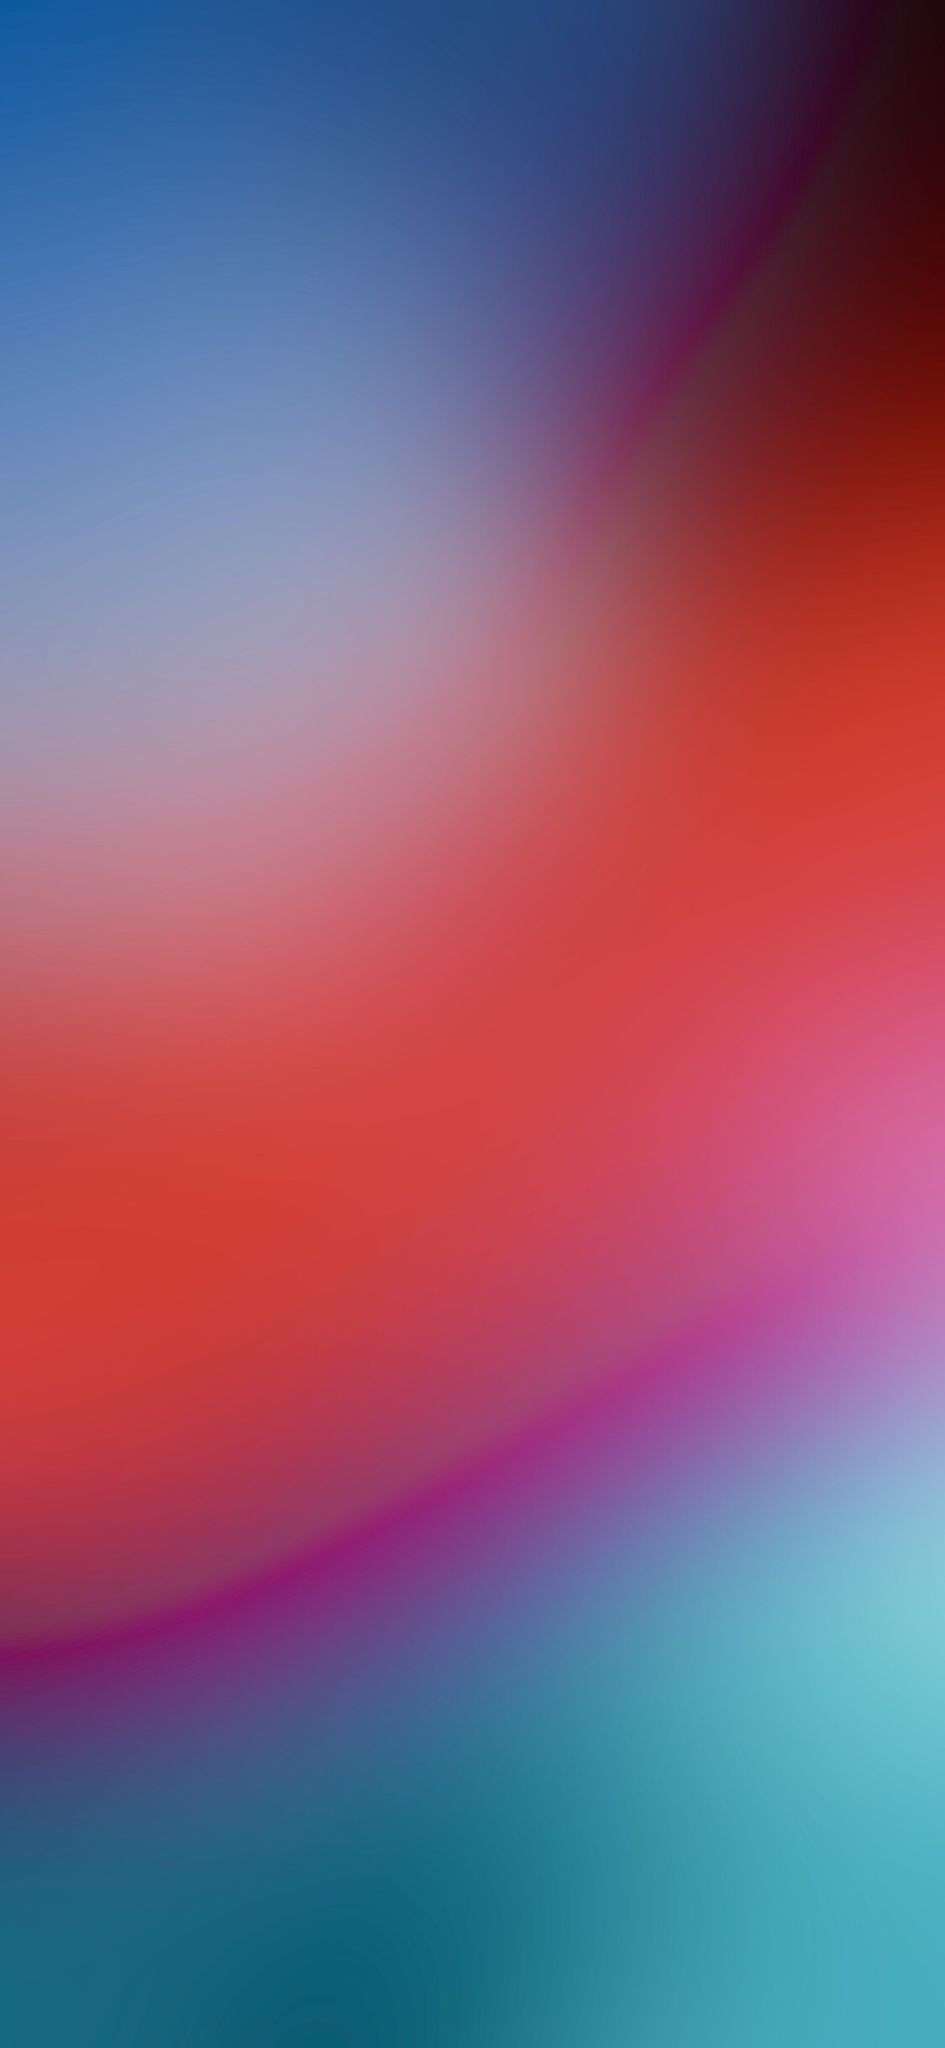 iOS 15 Wallpaper from Wallpaper Cave